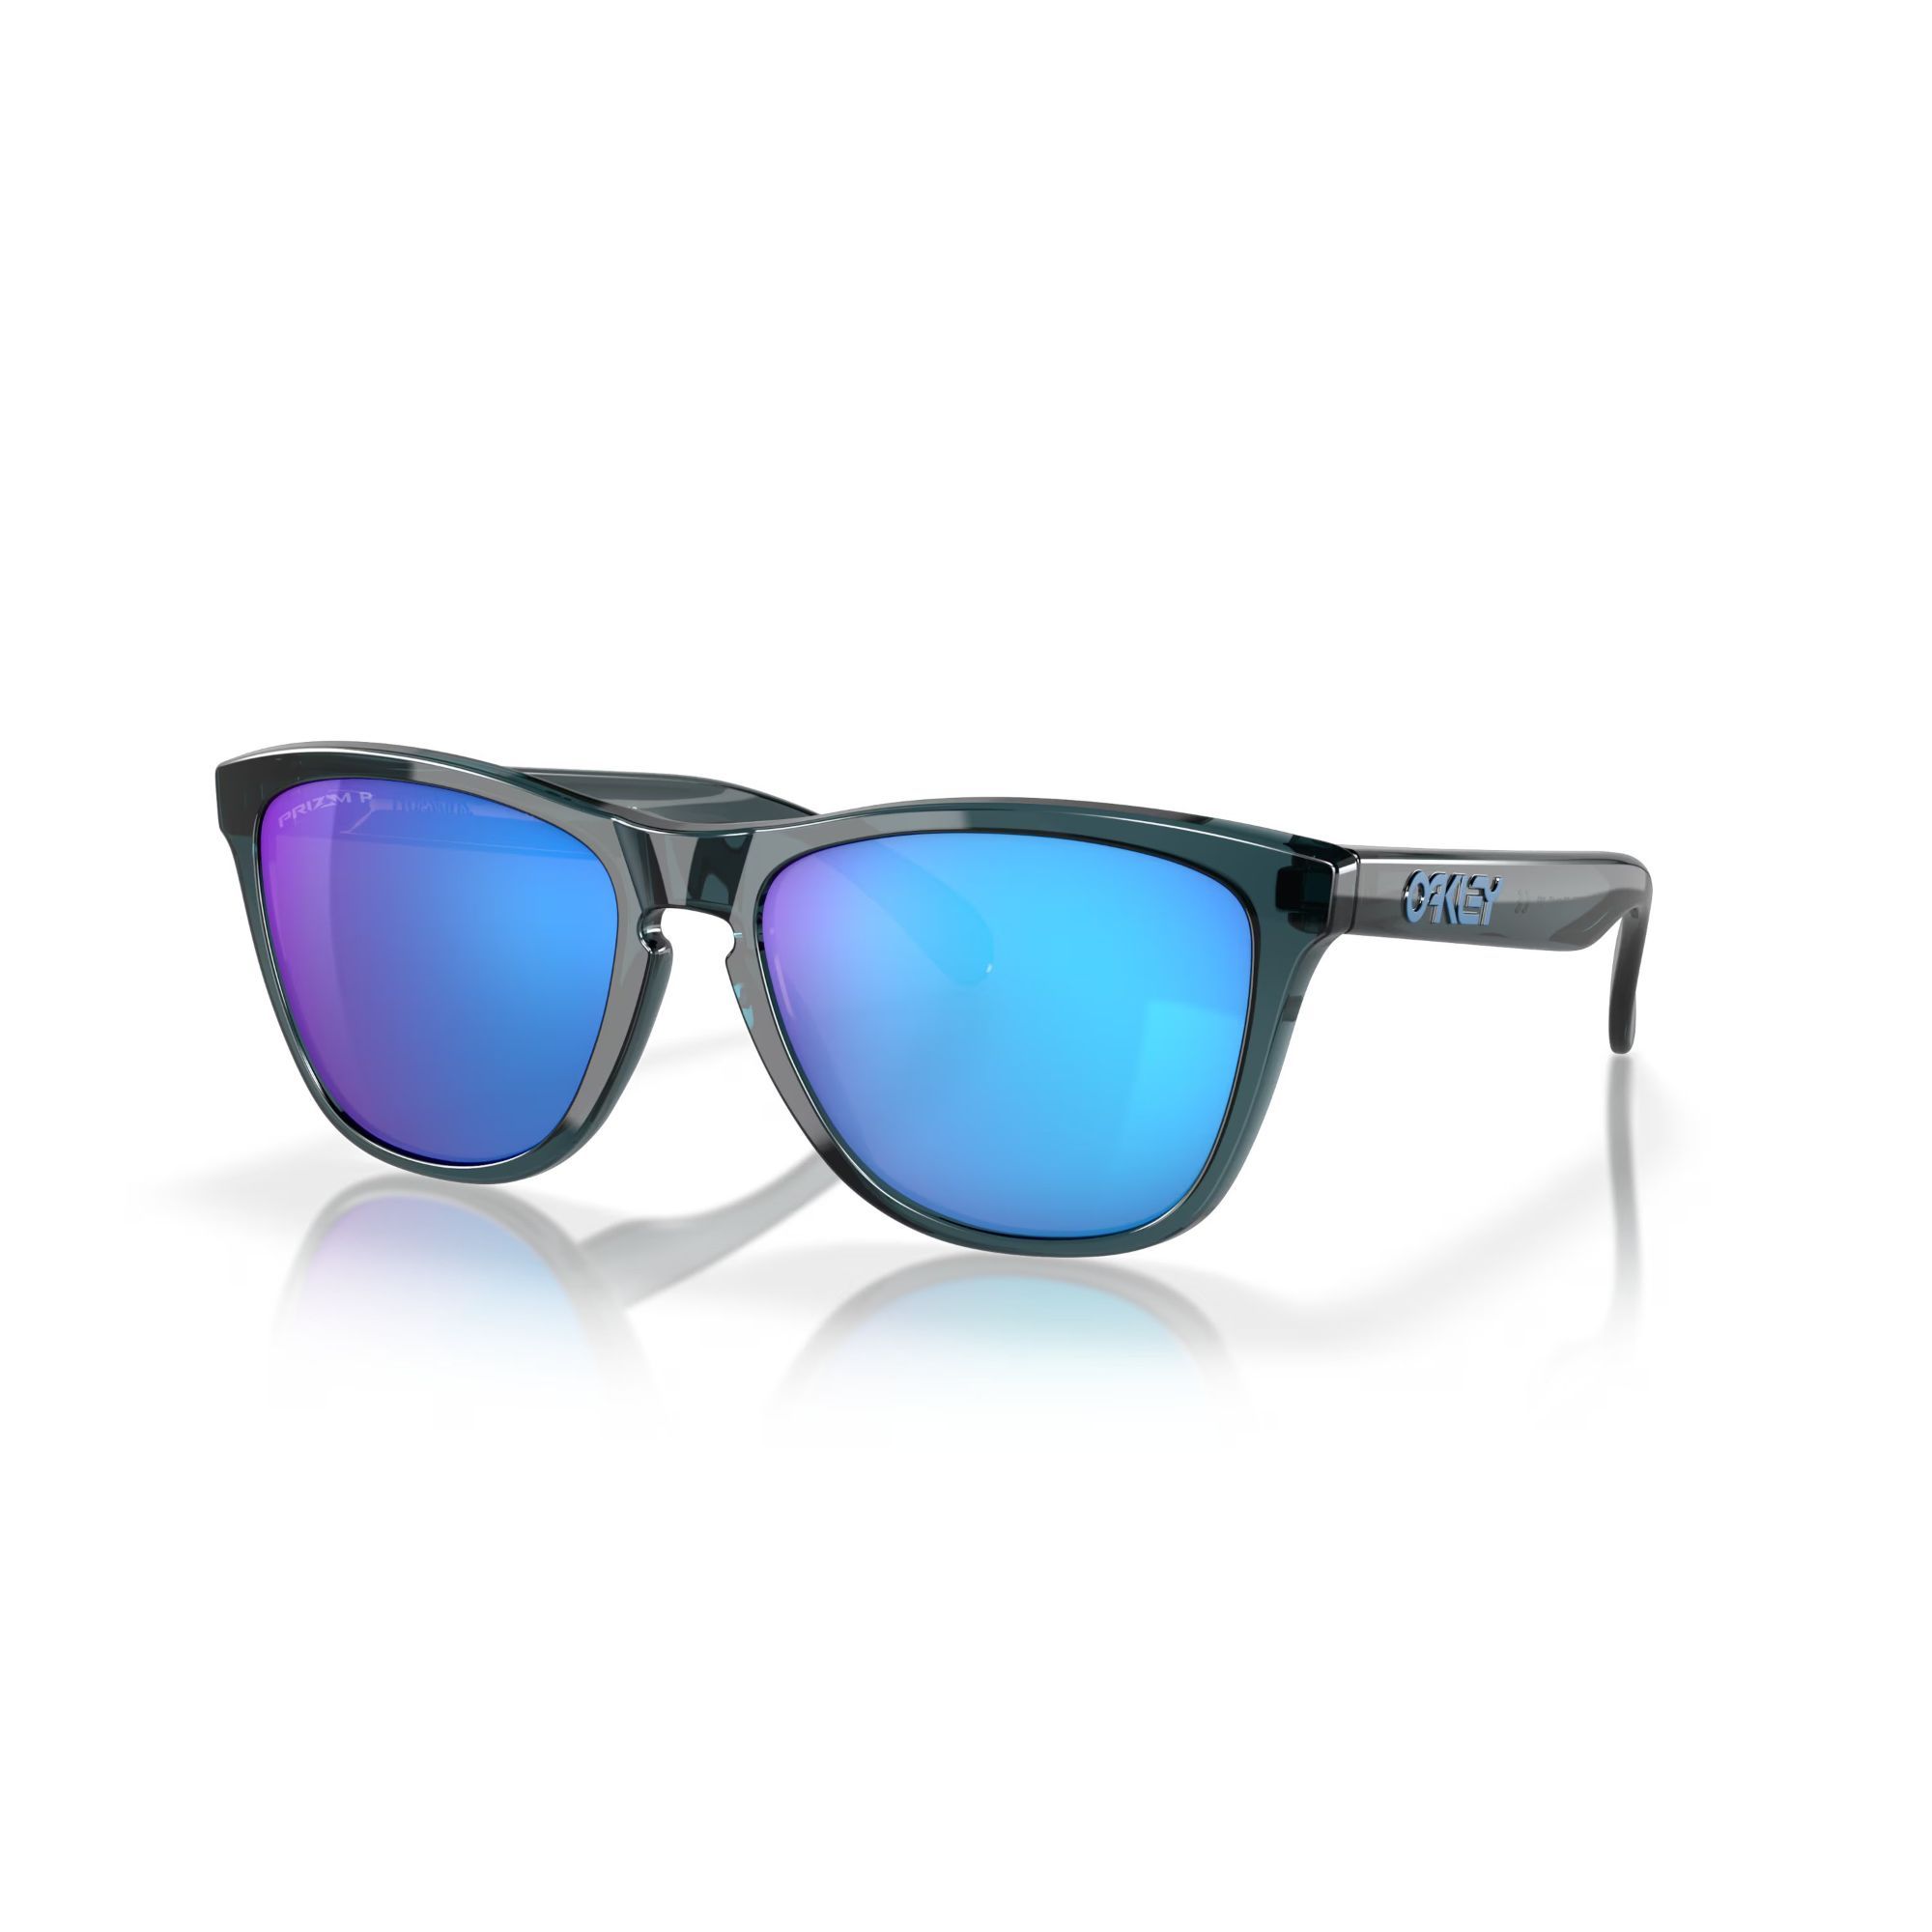 Frogskins Sunglasses OO9013-F6 size 55